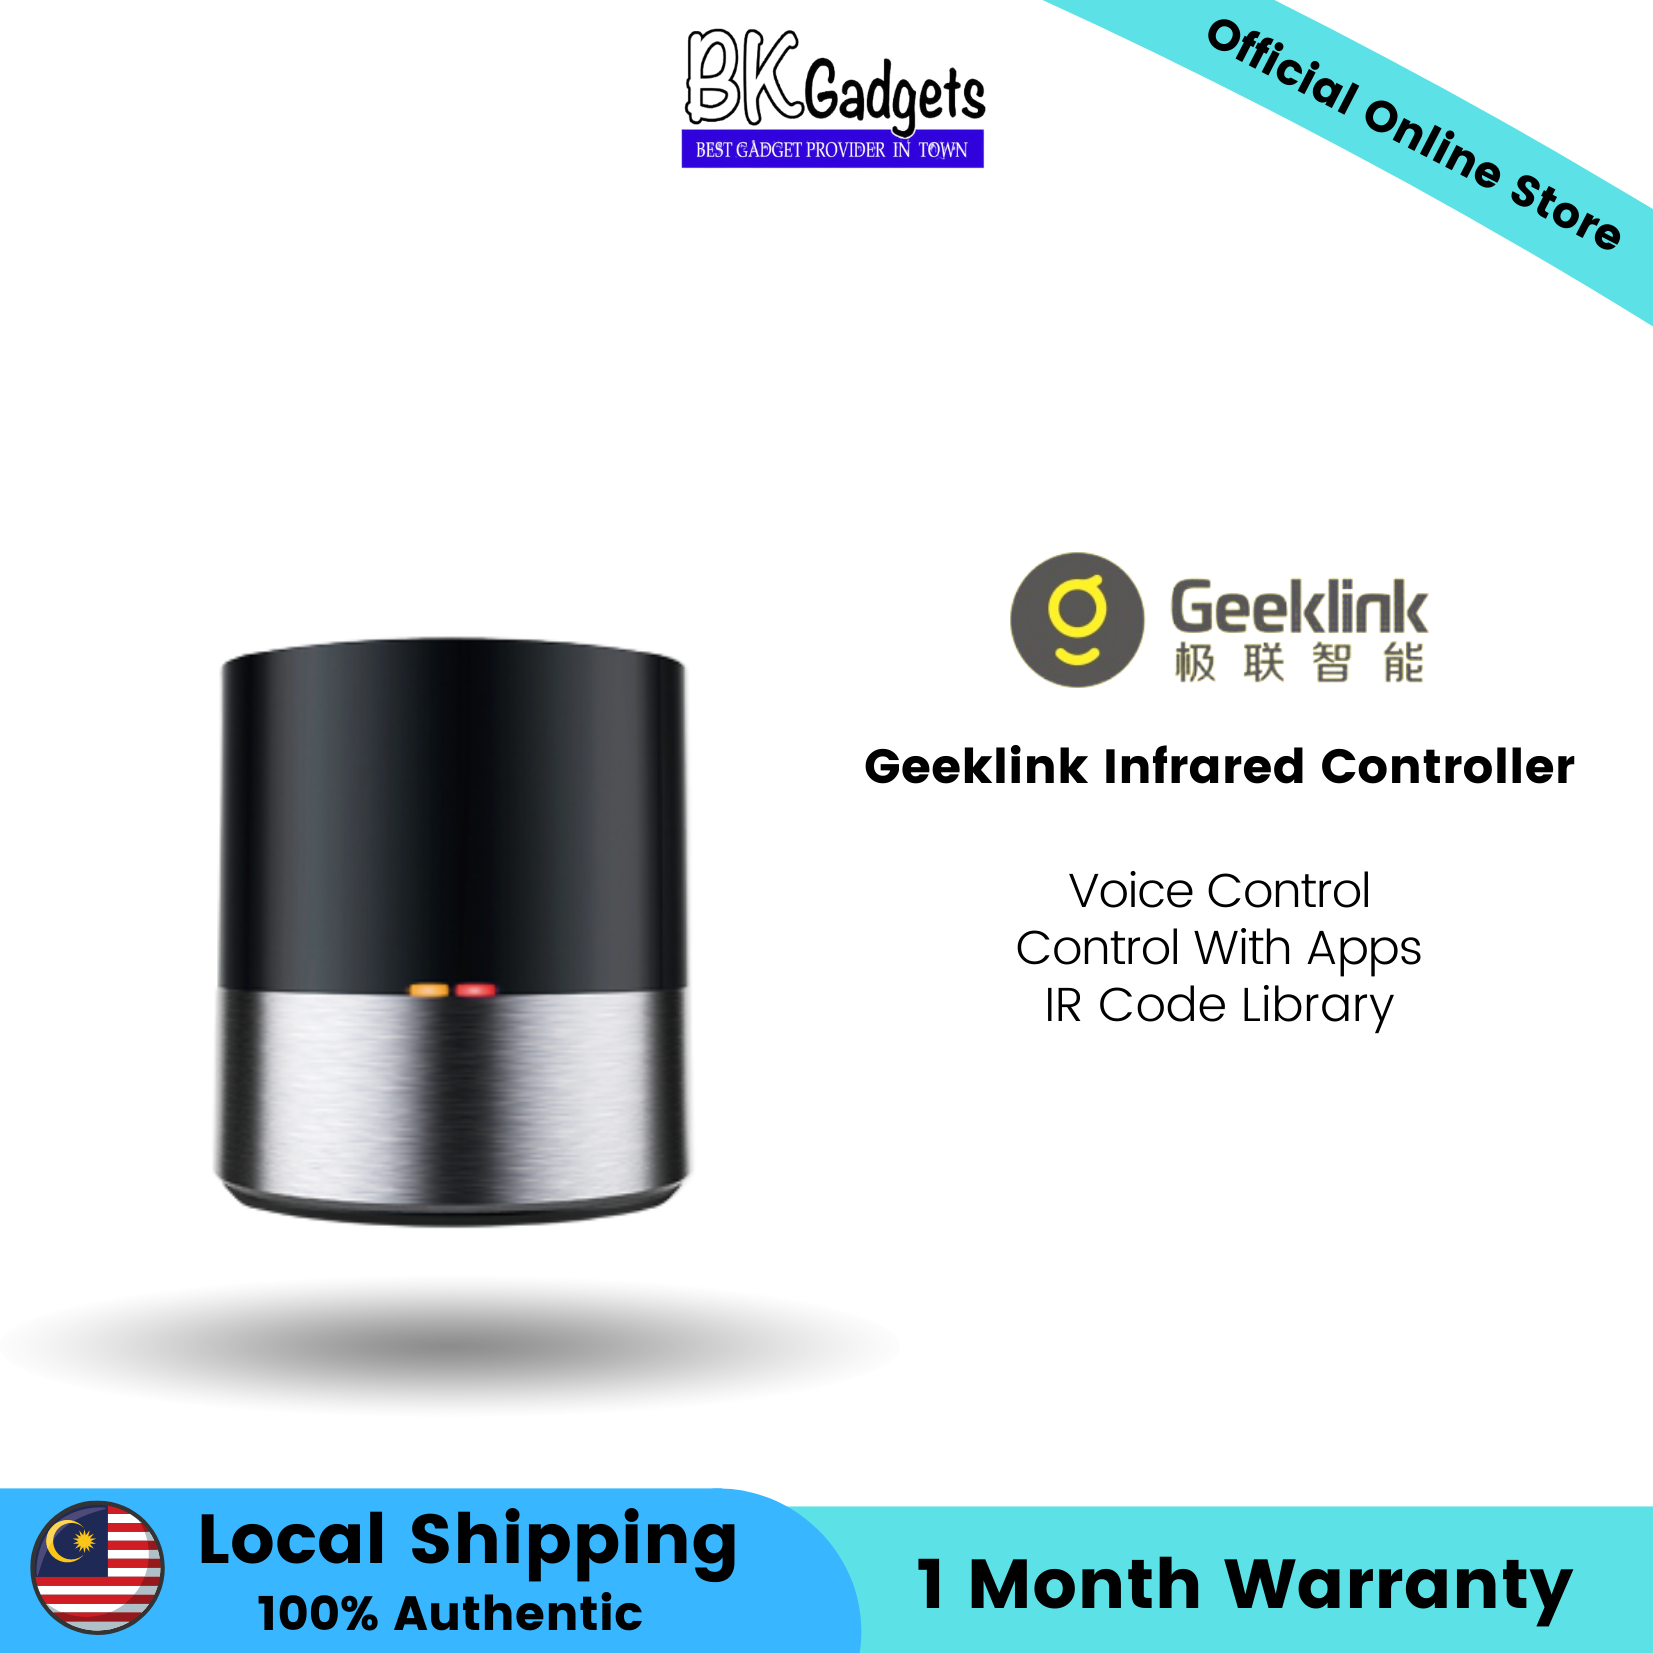 Geeklink Infrared Controller |Voice Control |Control With Apps |IR Code Library